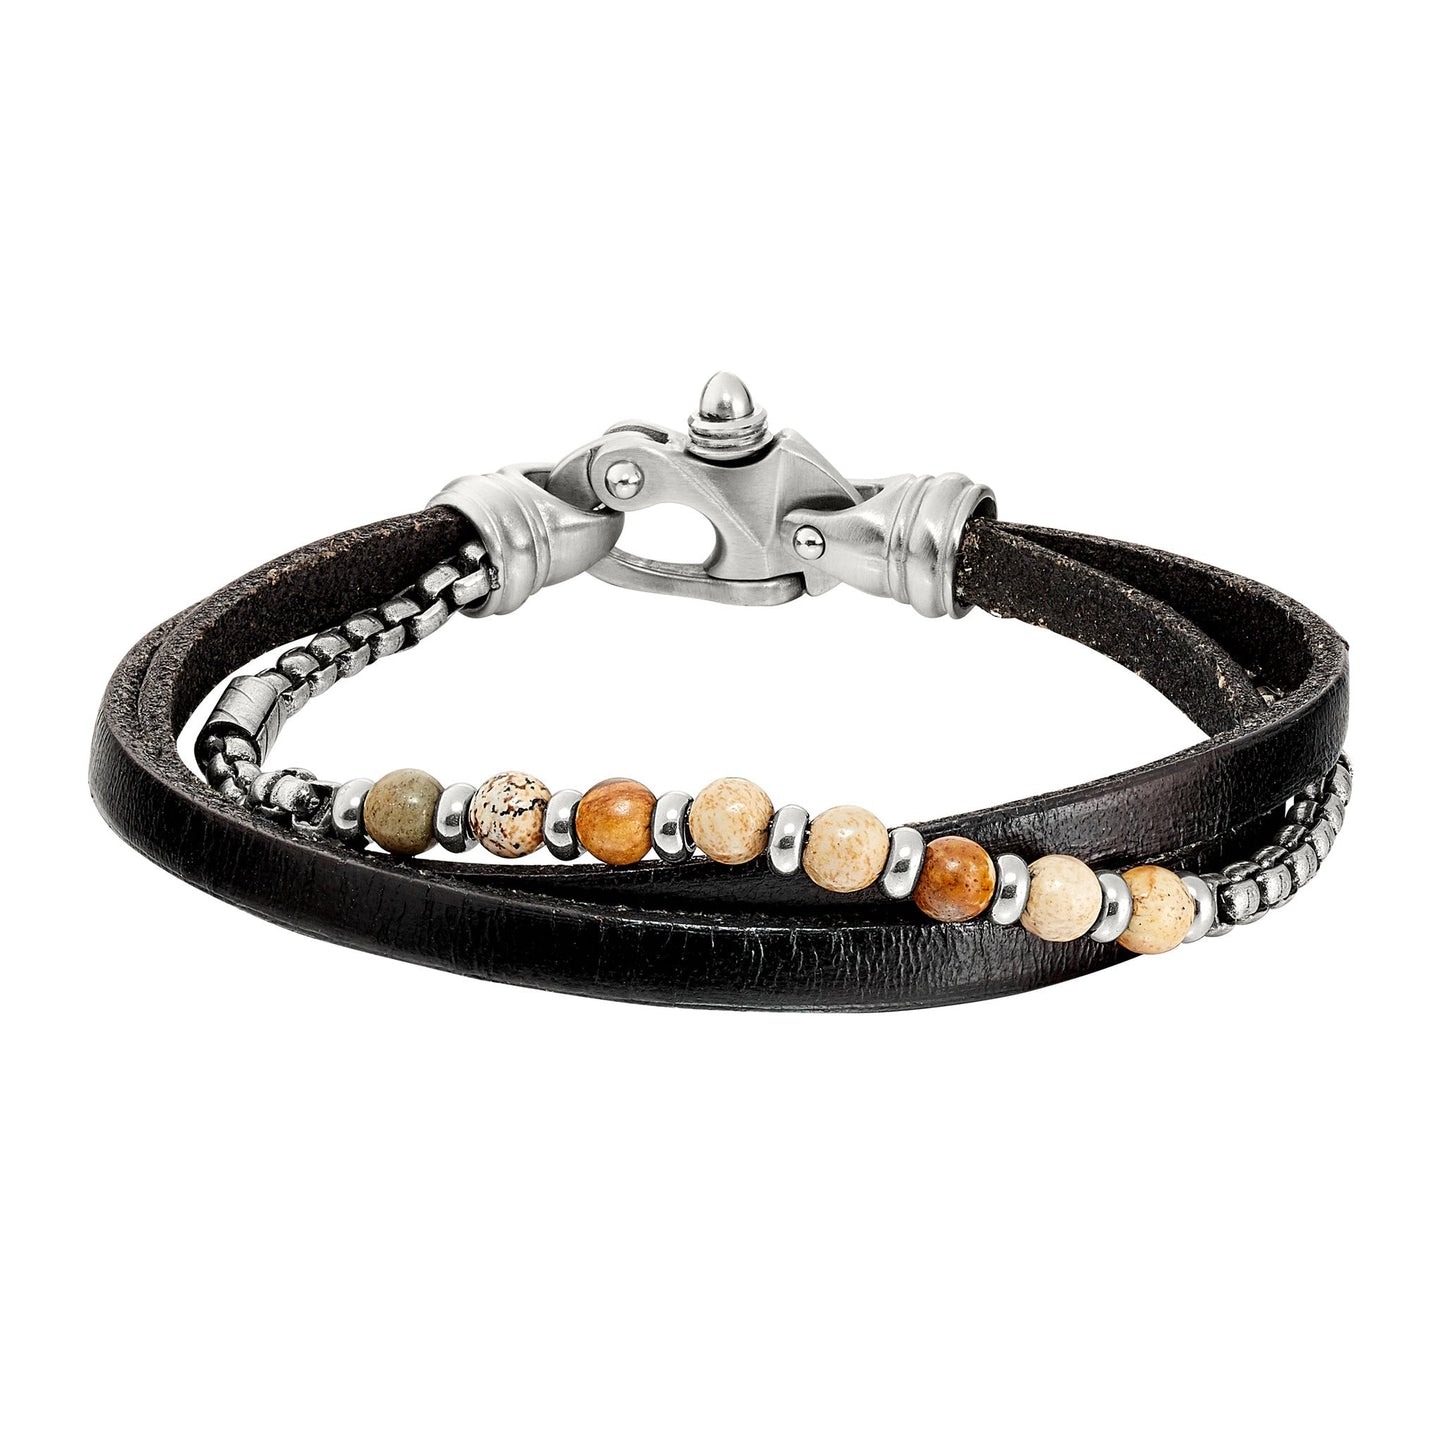 A black leather 3 cord bracelet with box link chain and brown beads displayed on a neutral white background.